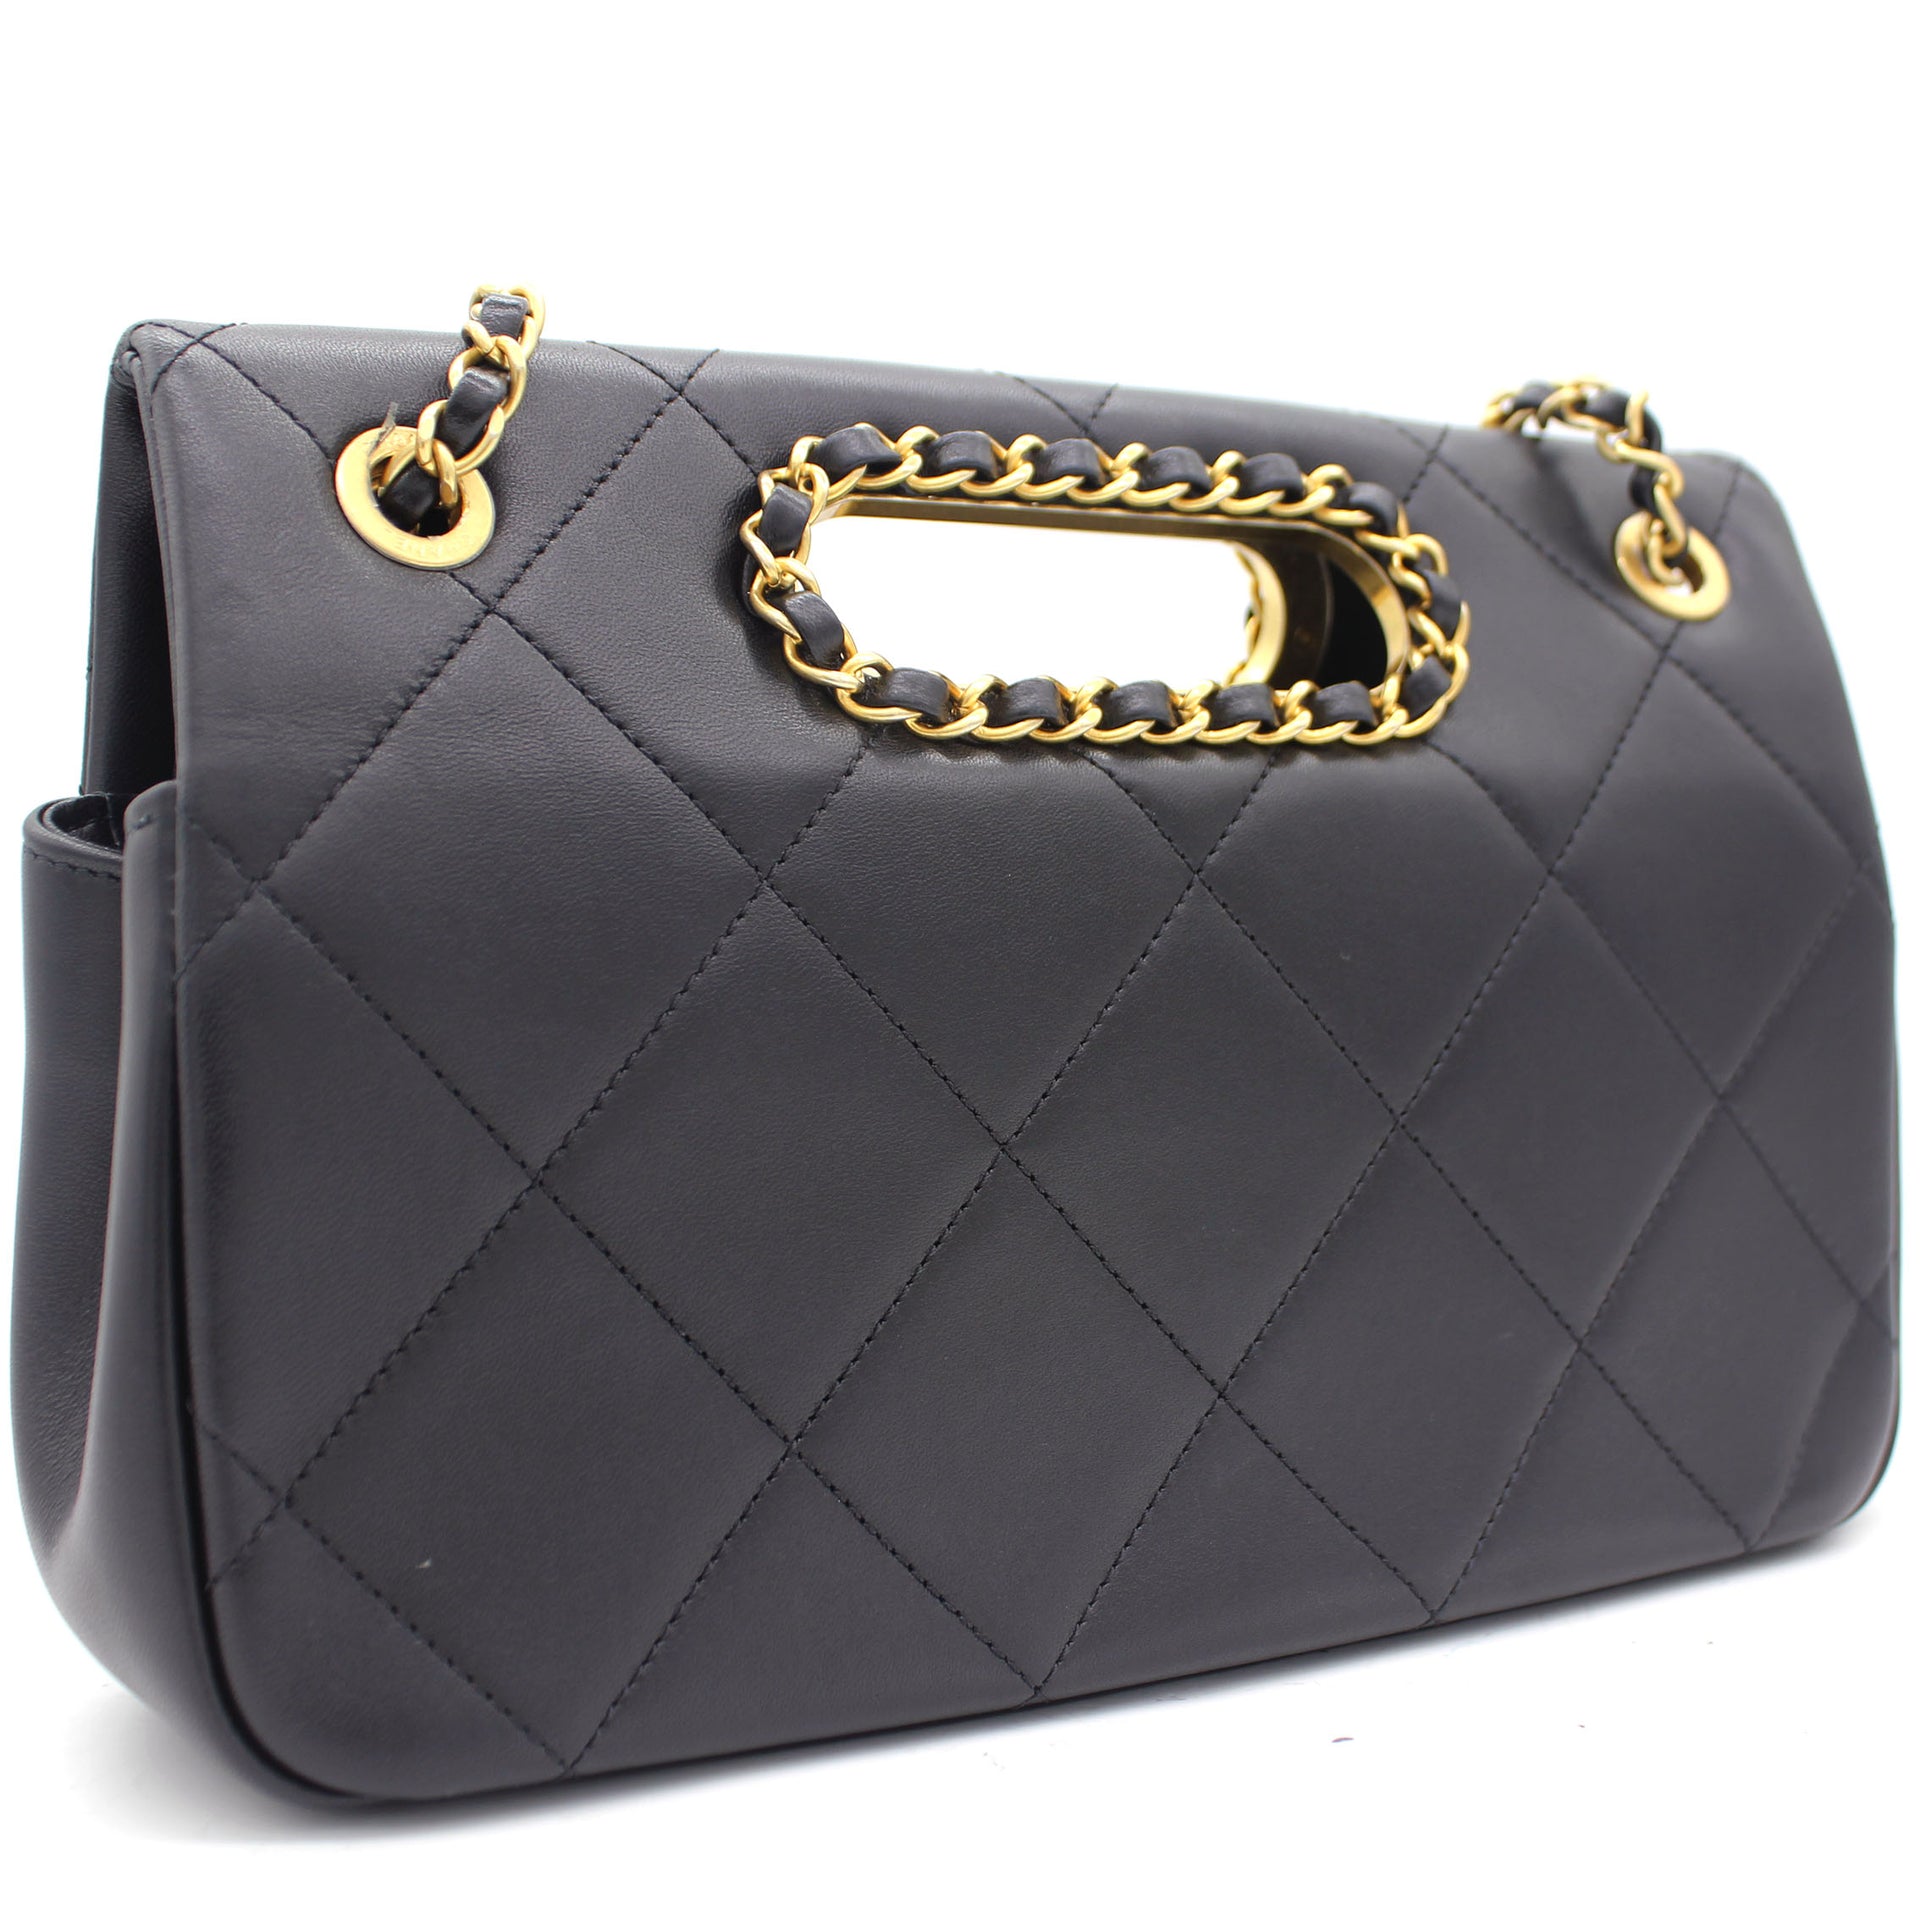 Chanel Black Quilted Smooth Calfskin Leather Jumbo Chain Detail